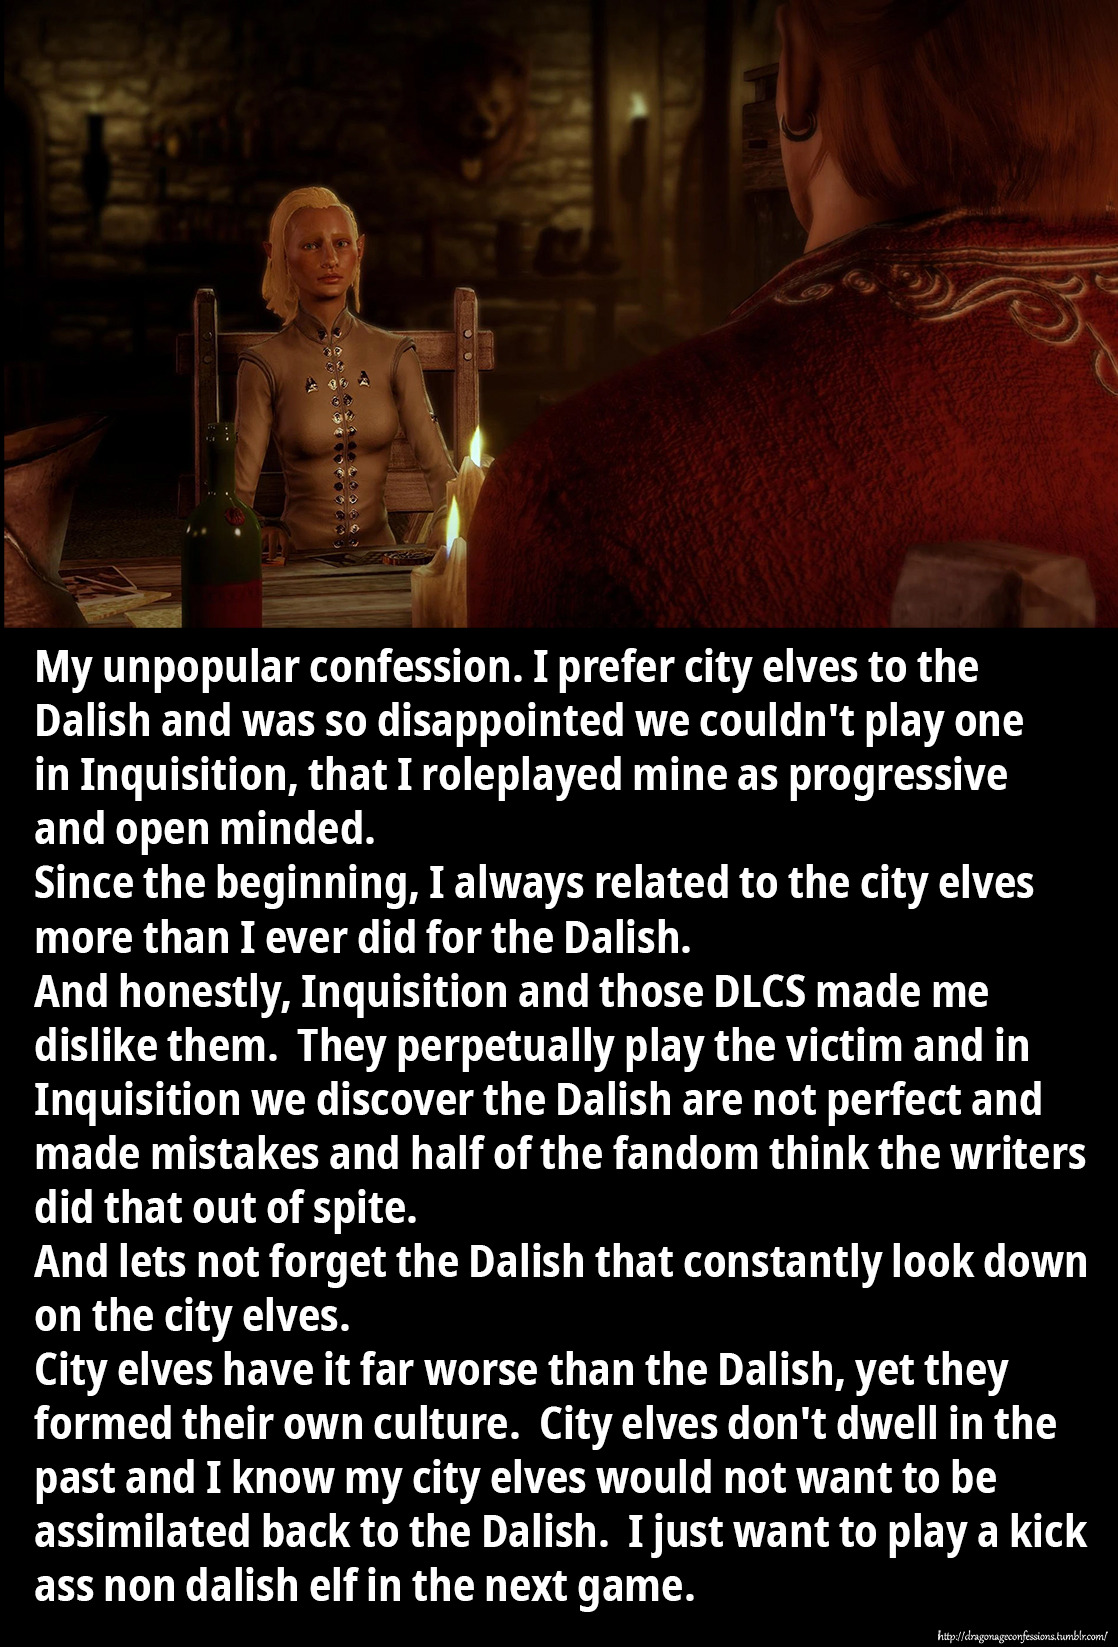 Dragon Age Confessions — CONFESSION: I'm replaying